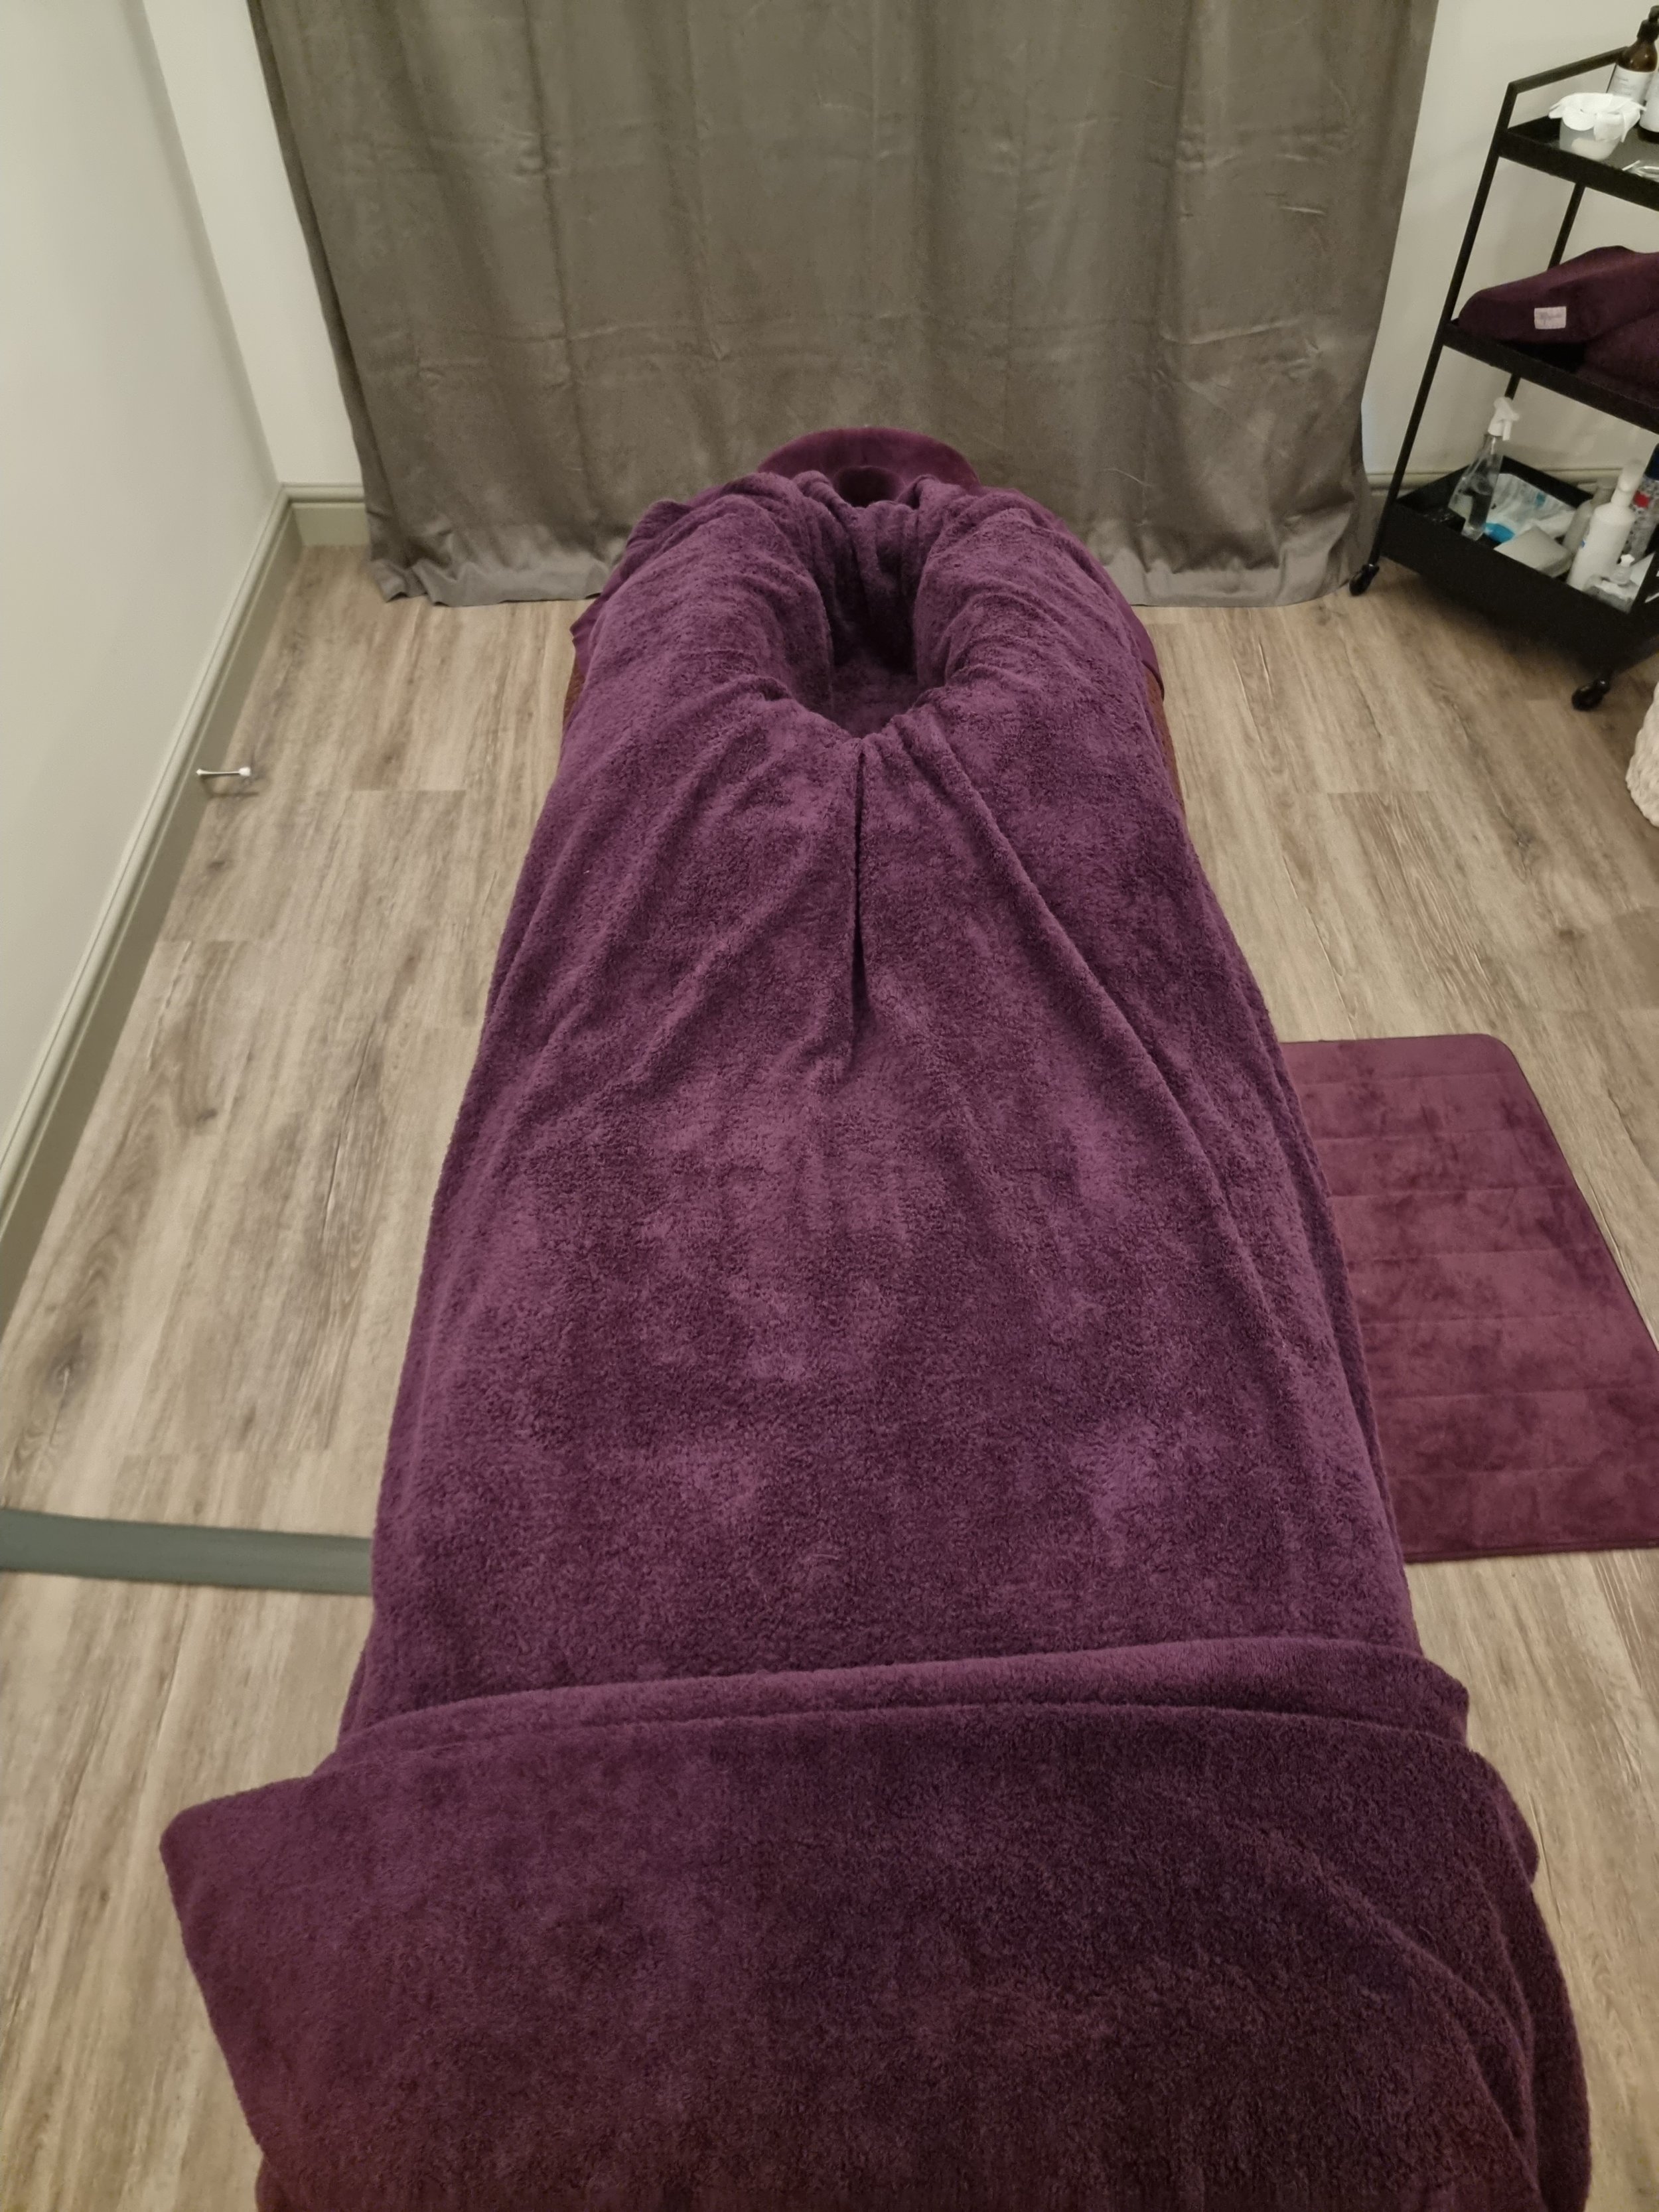 Treatment bed for Pregnancy massage at Idyllic wellbeing Leicestershire.jpg